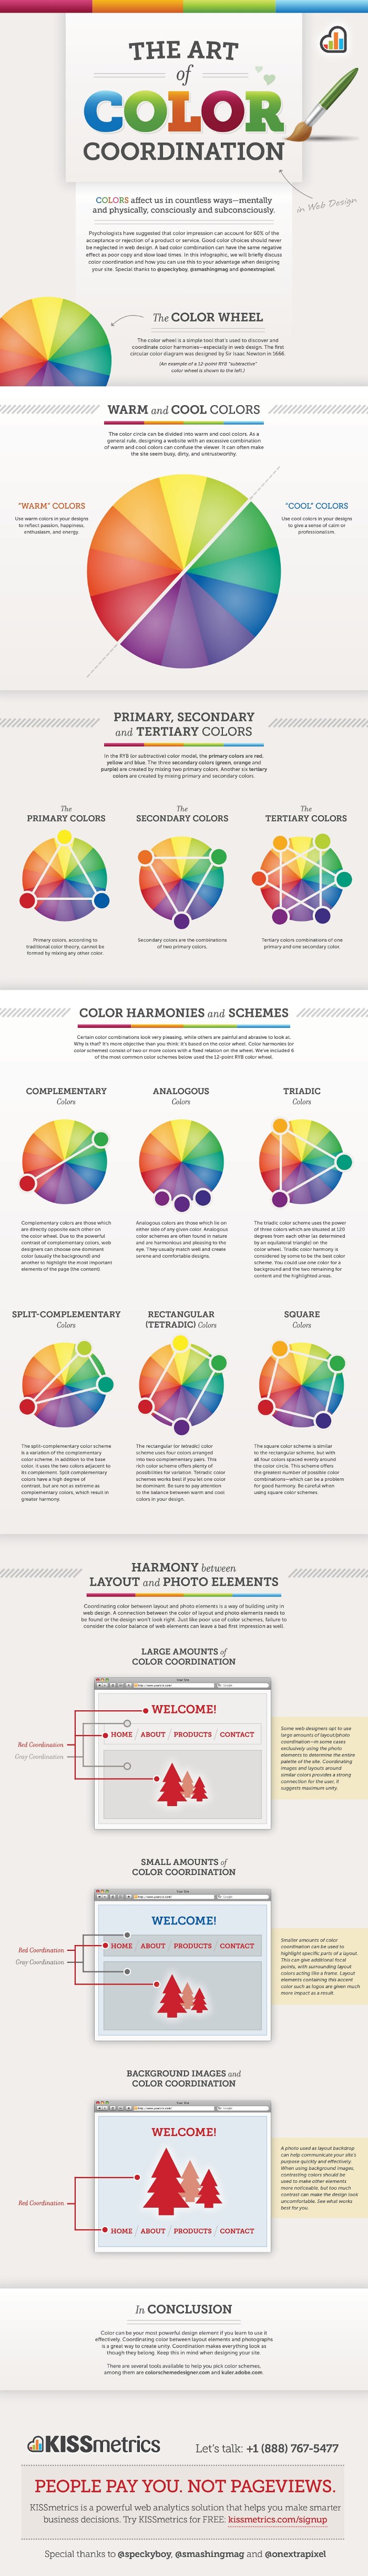 Learn How To Combine Colors With This Handy Infographic Super Dev Resources